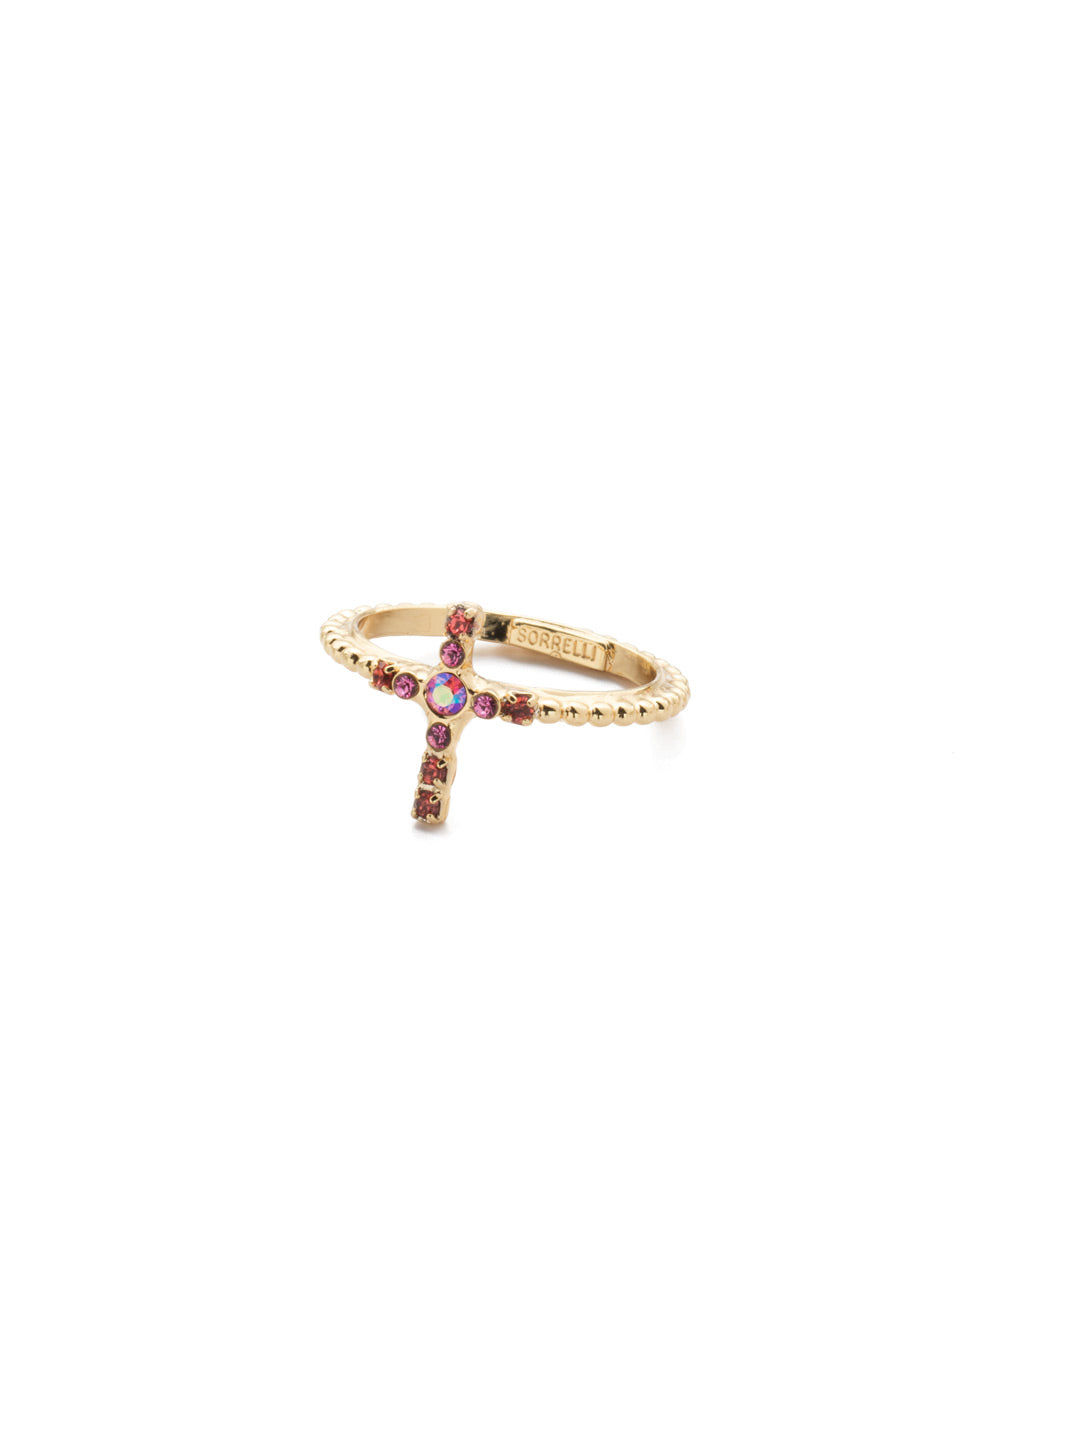 Monique Band Ring - REN1BGBGA - The Monique Band Ring is the piece you're looking for when you want to wear a cross in a unique and fun way. Just slide on this hammered metal beauty. From Sorrelli's Begonia collection in our Bright Gold-tone finish.